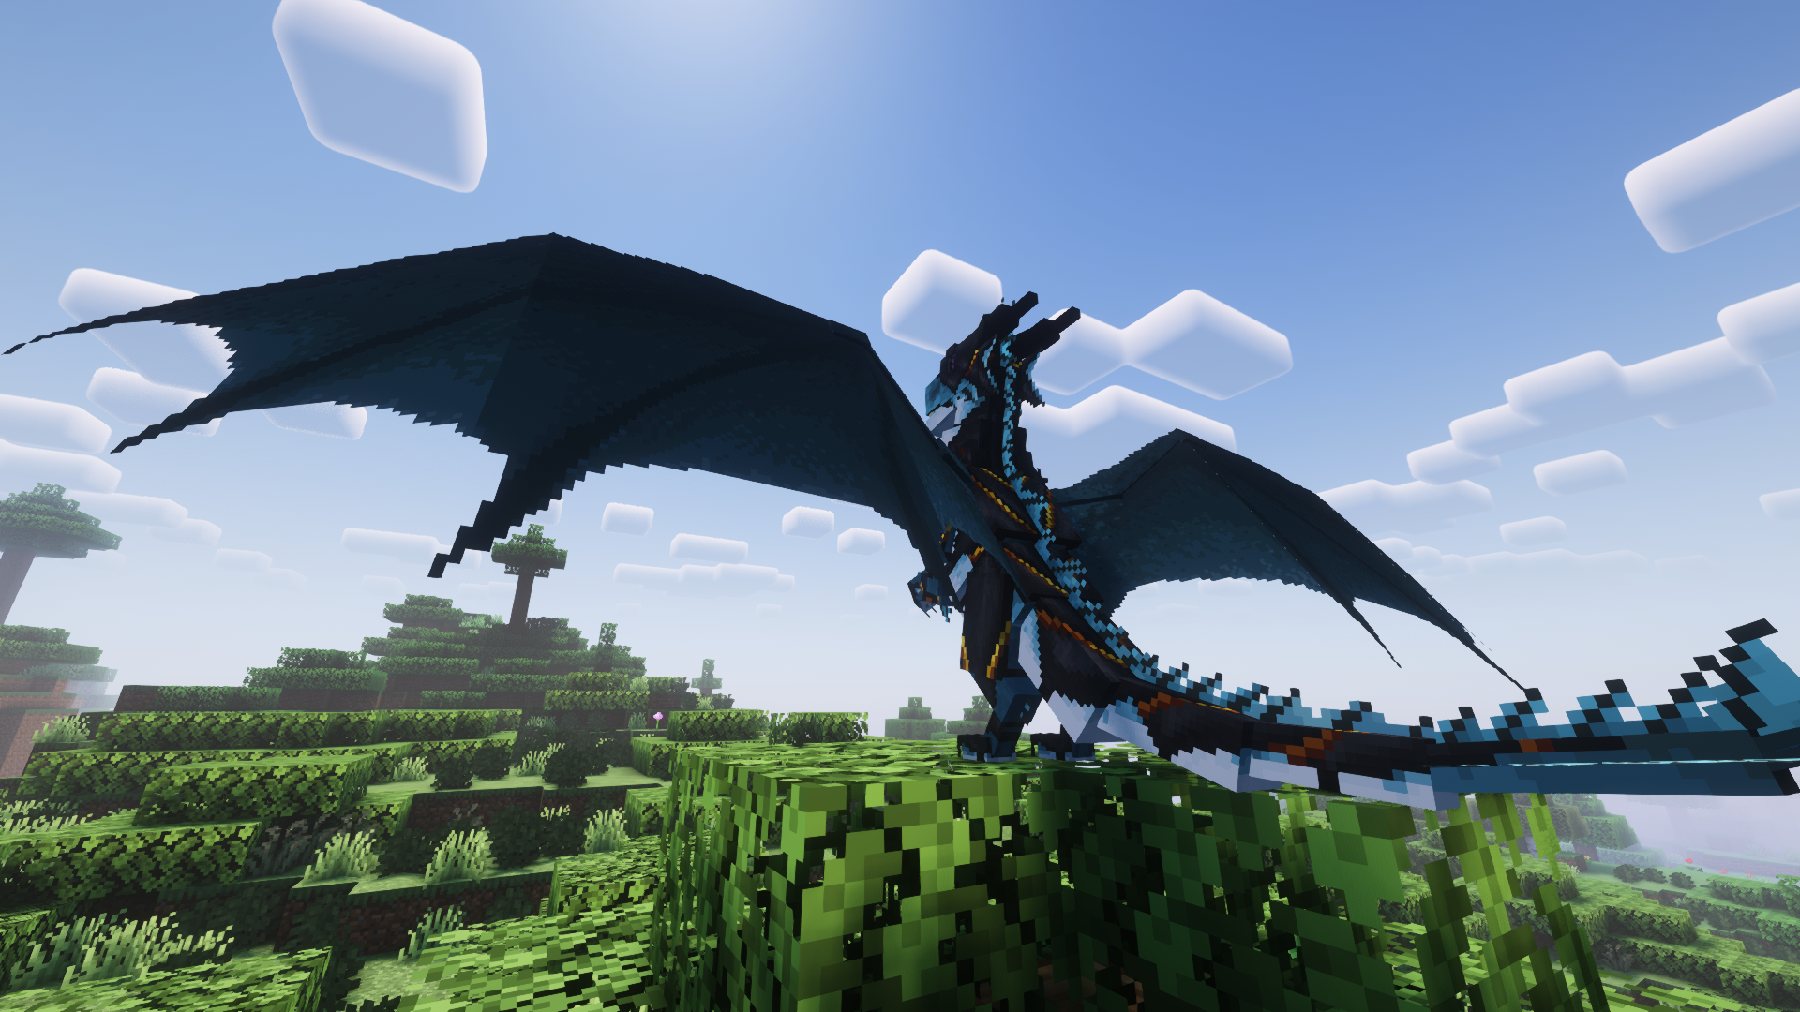 Dragons Sword and More - Minecraft Mods - CurseForge